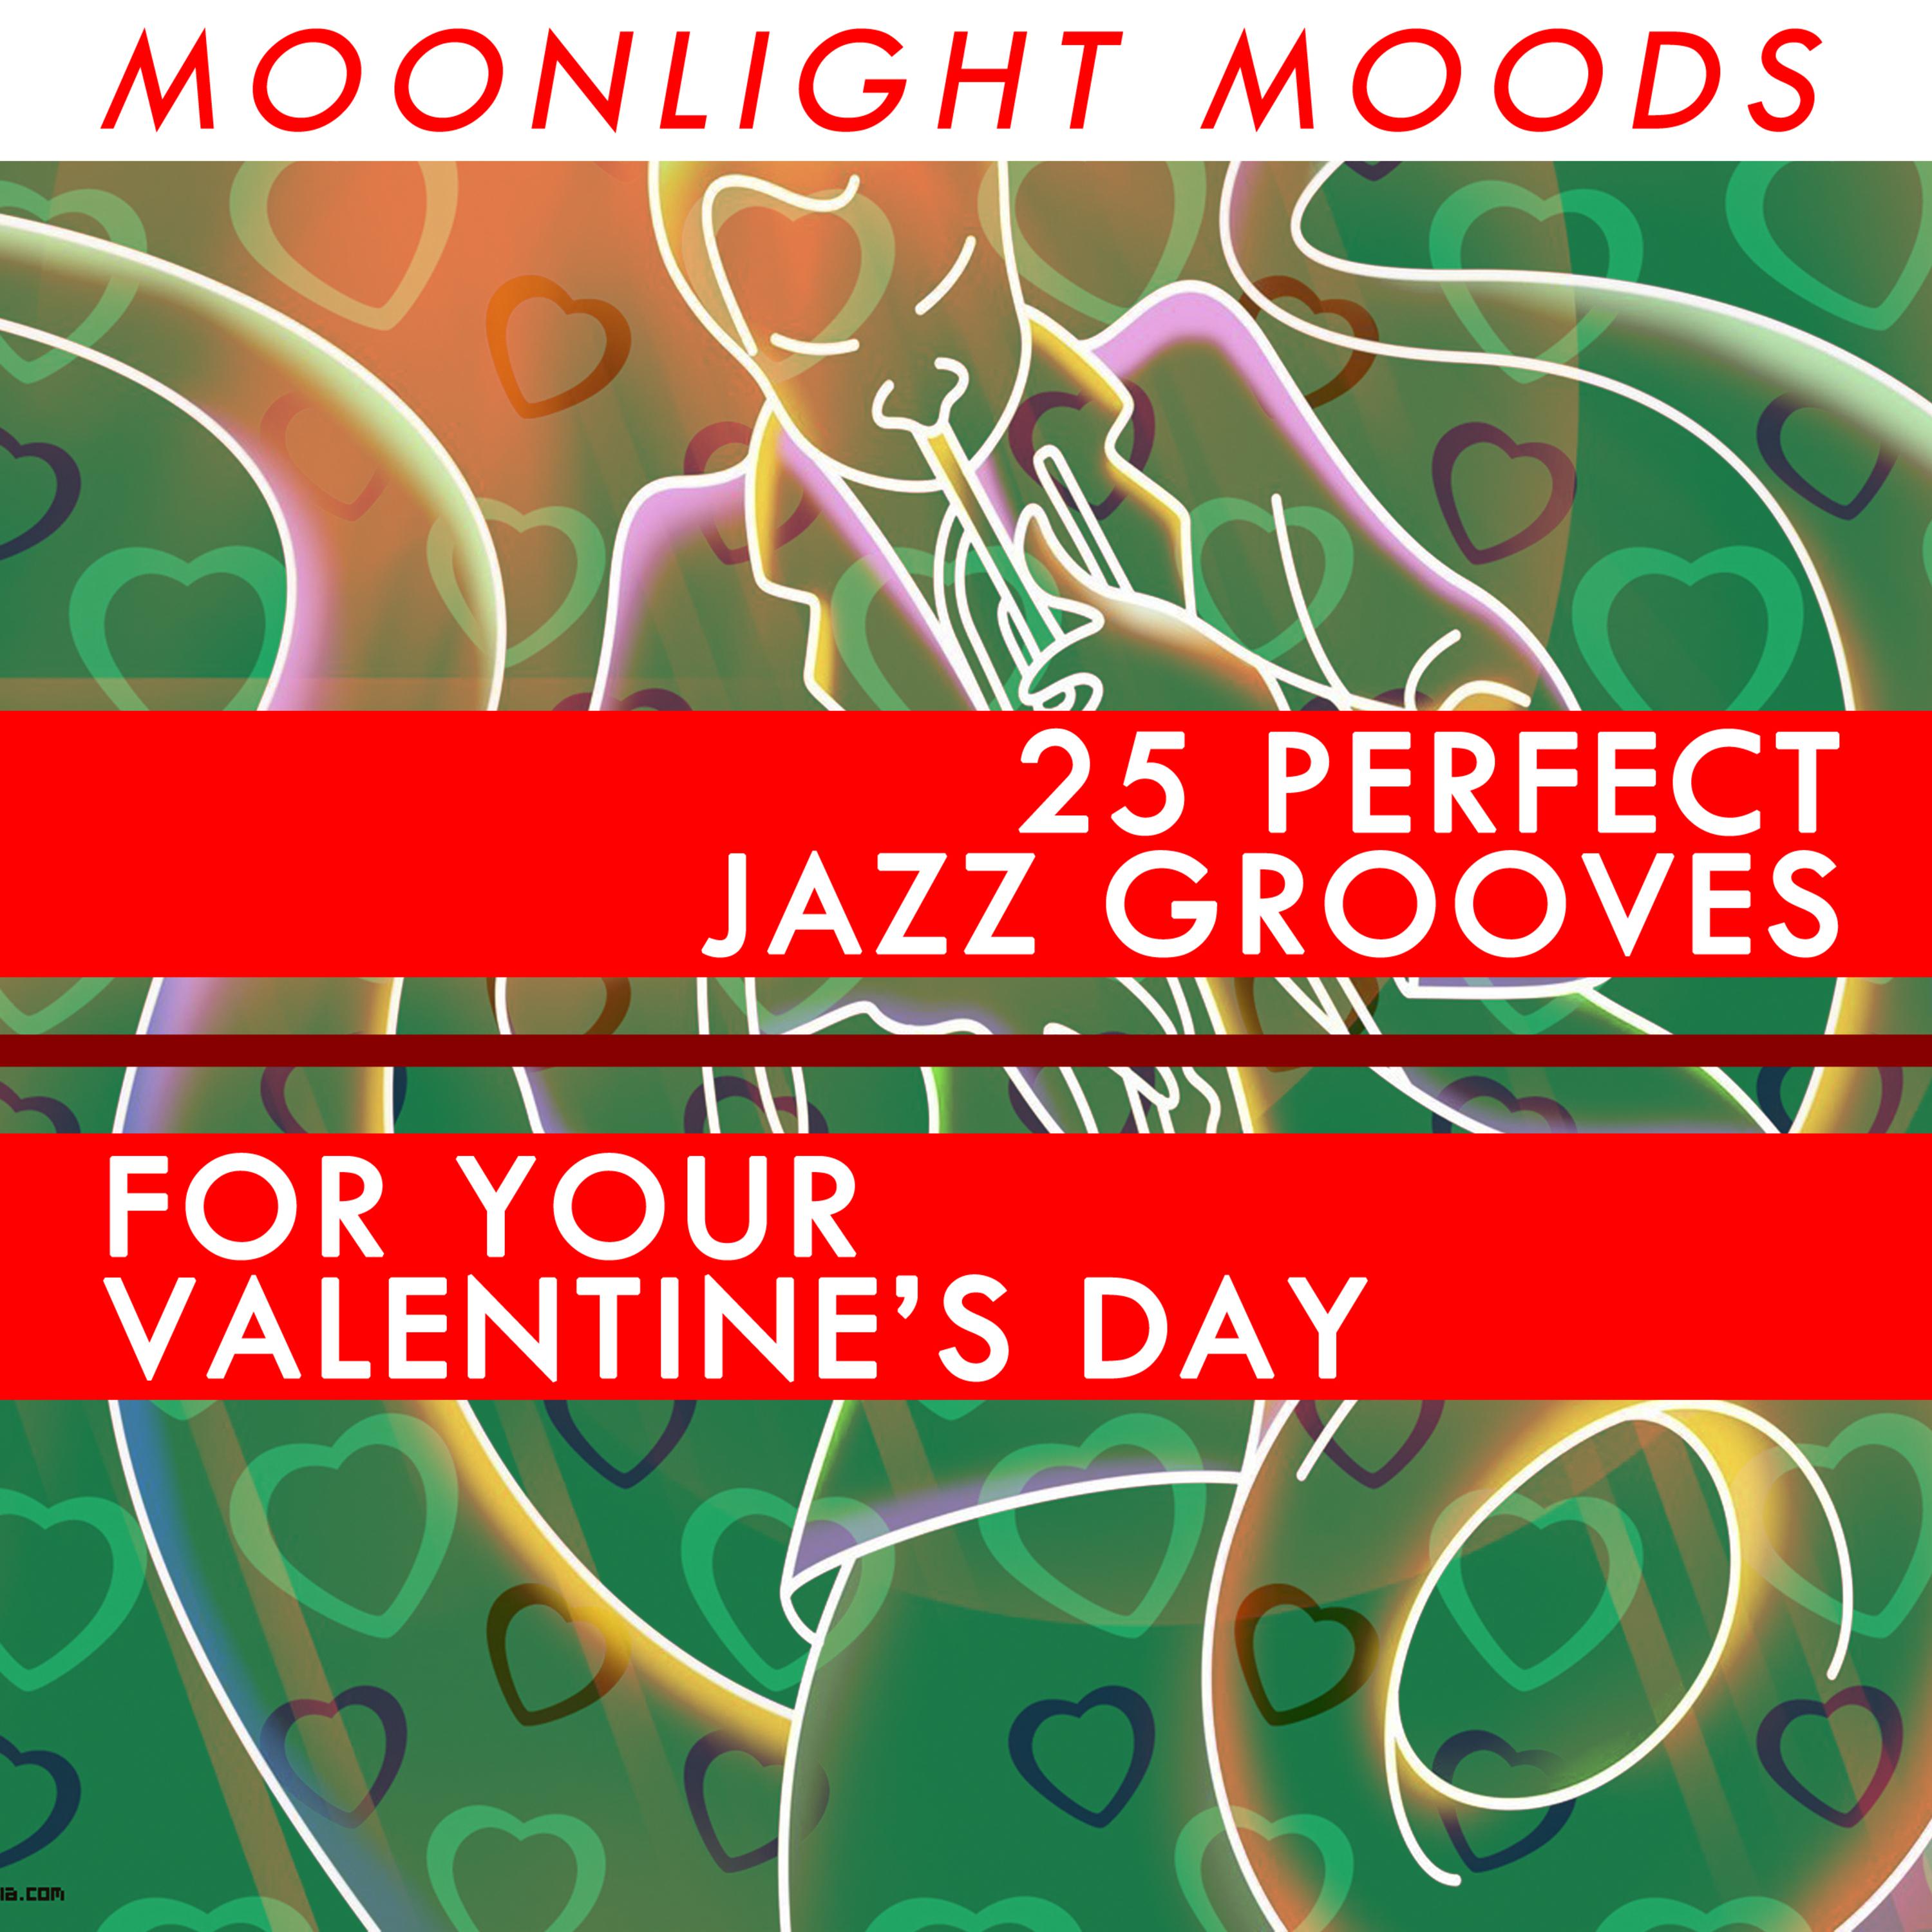 Moonlight Moods - 25 Perfect Jazz Grooves For Your Valentine's Day